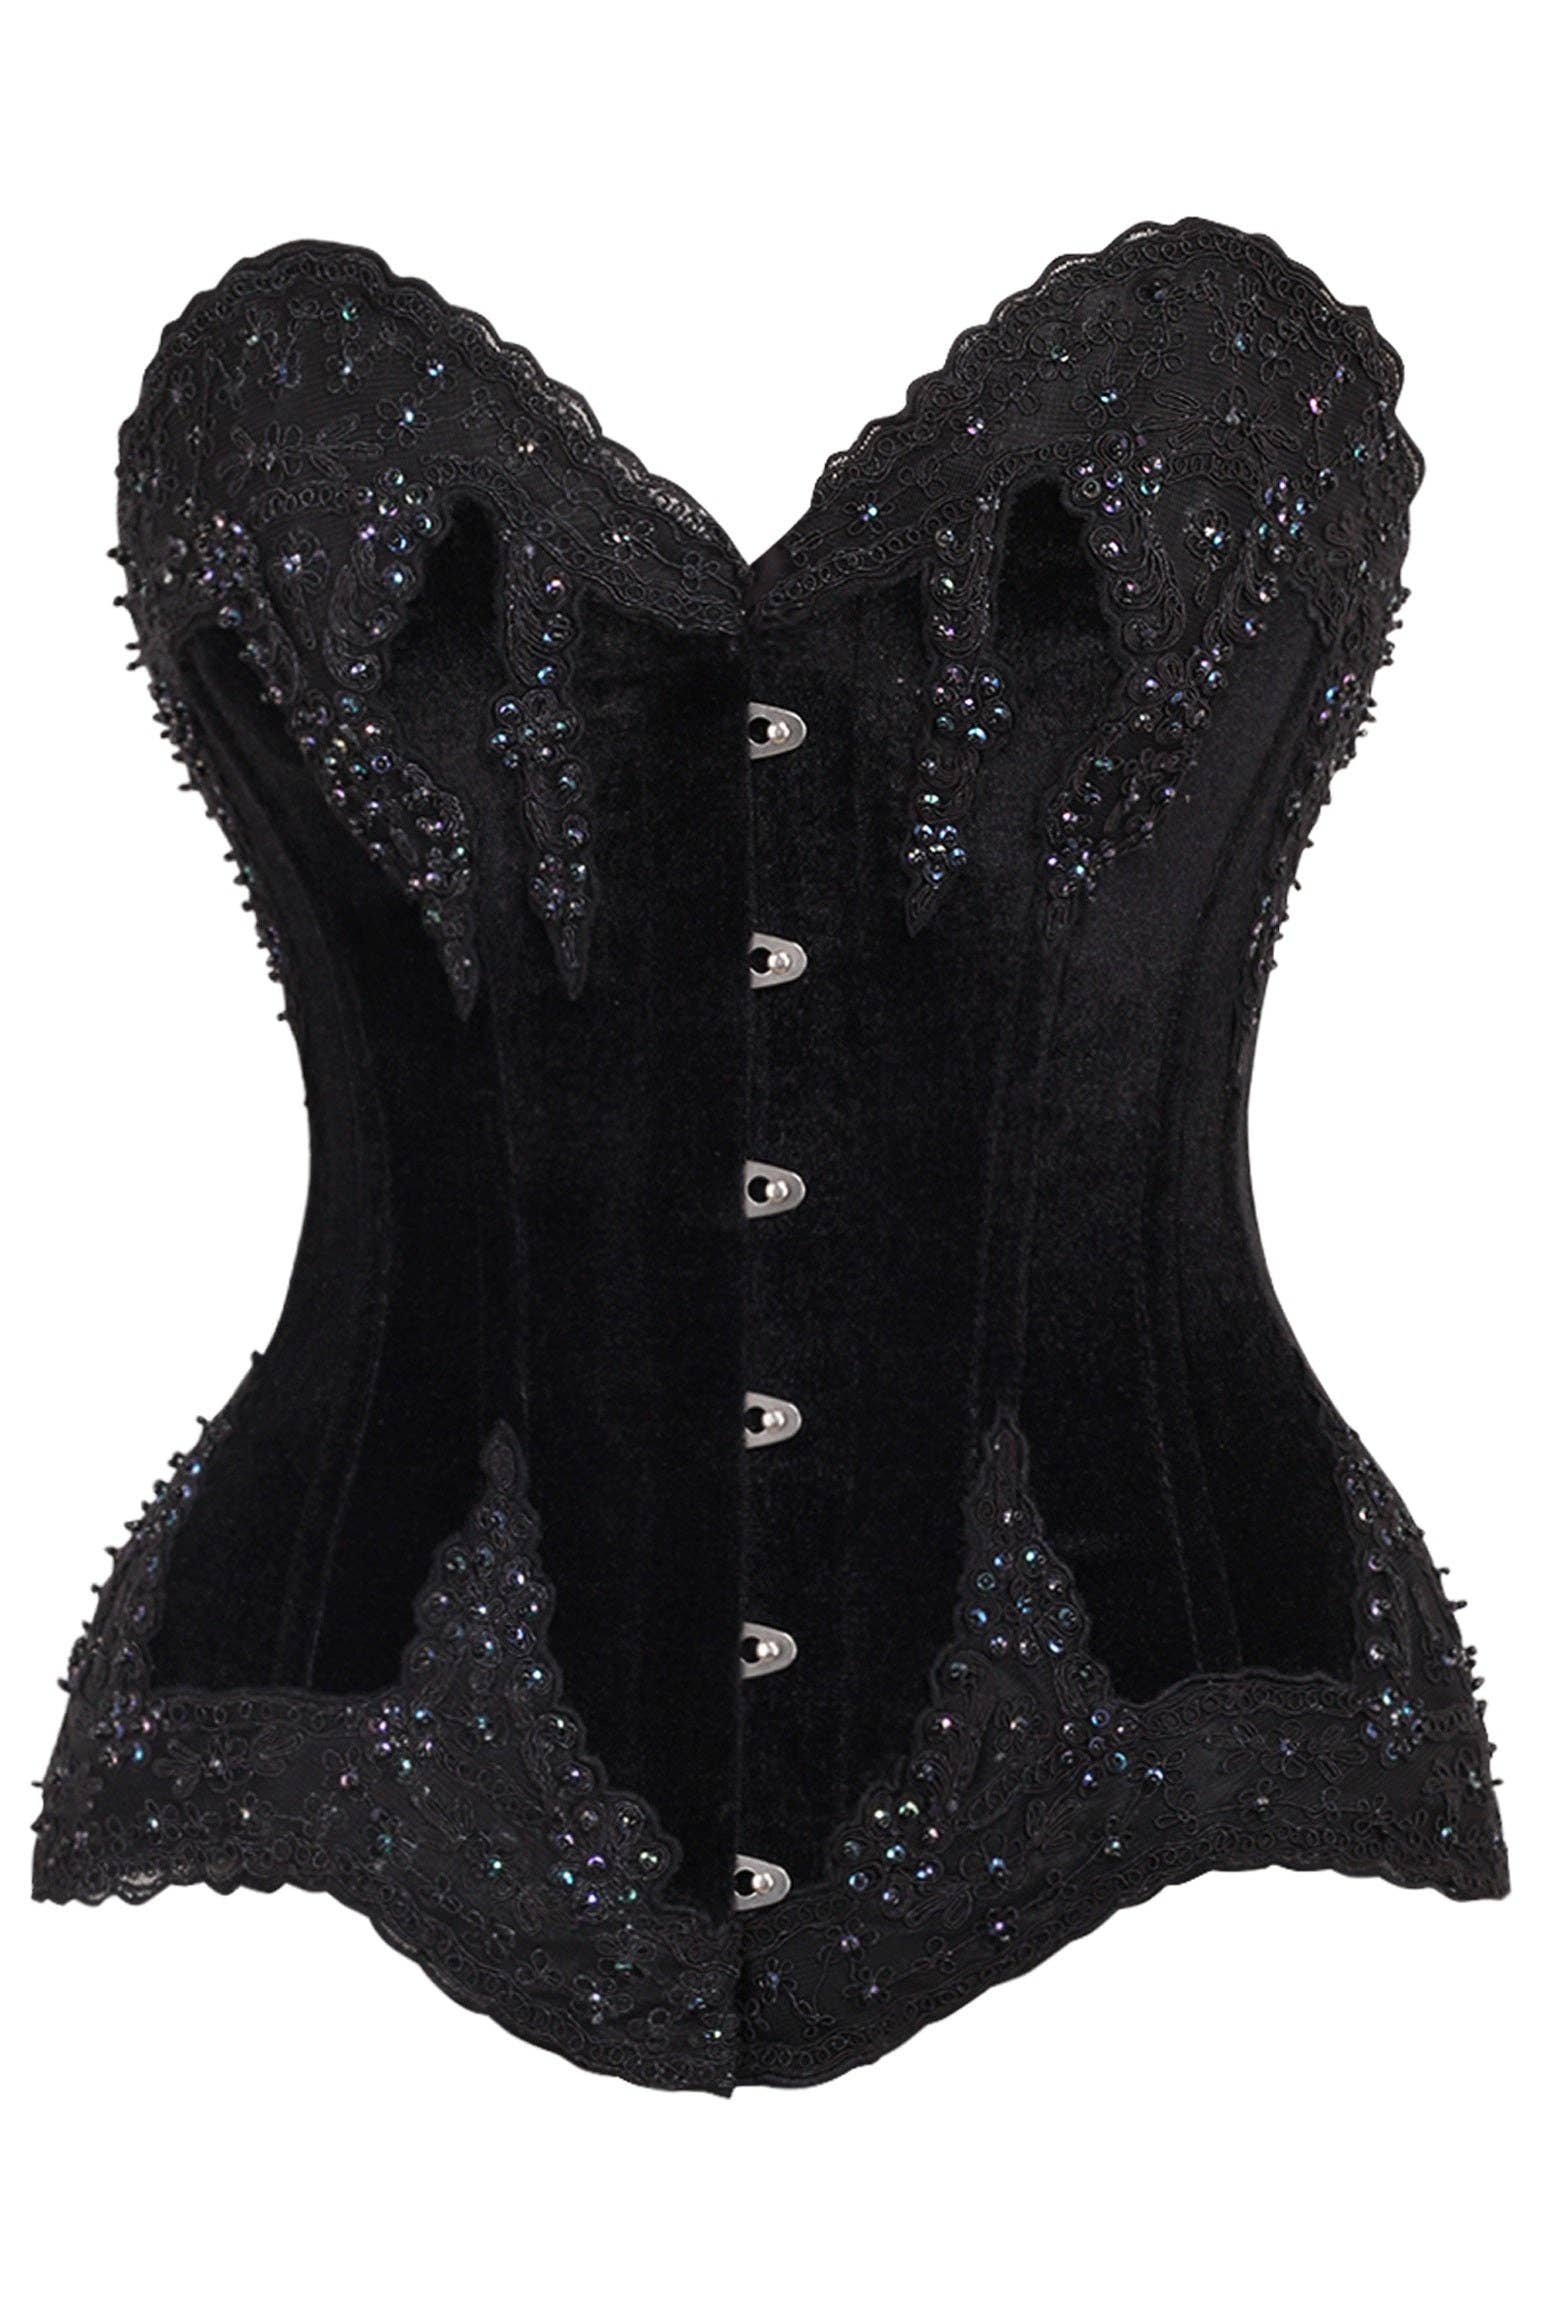 Daisy Corsets wholesale products